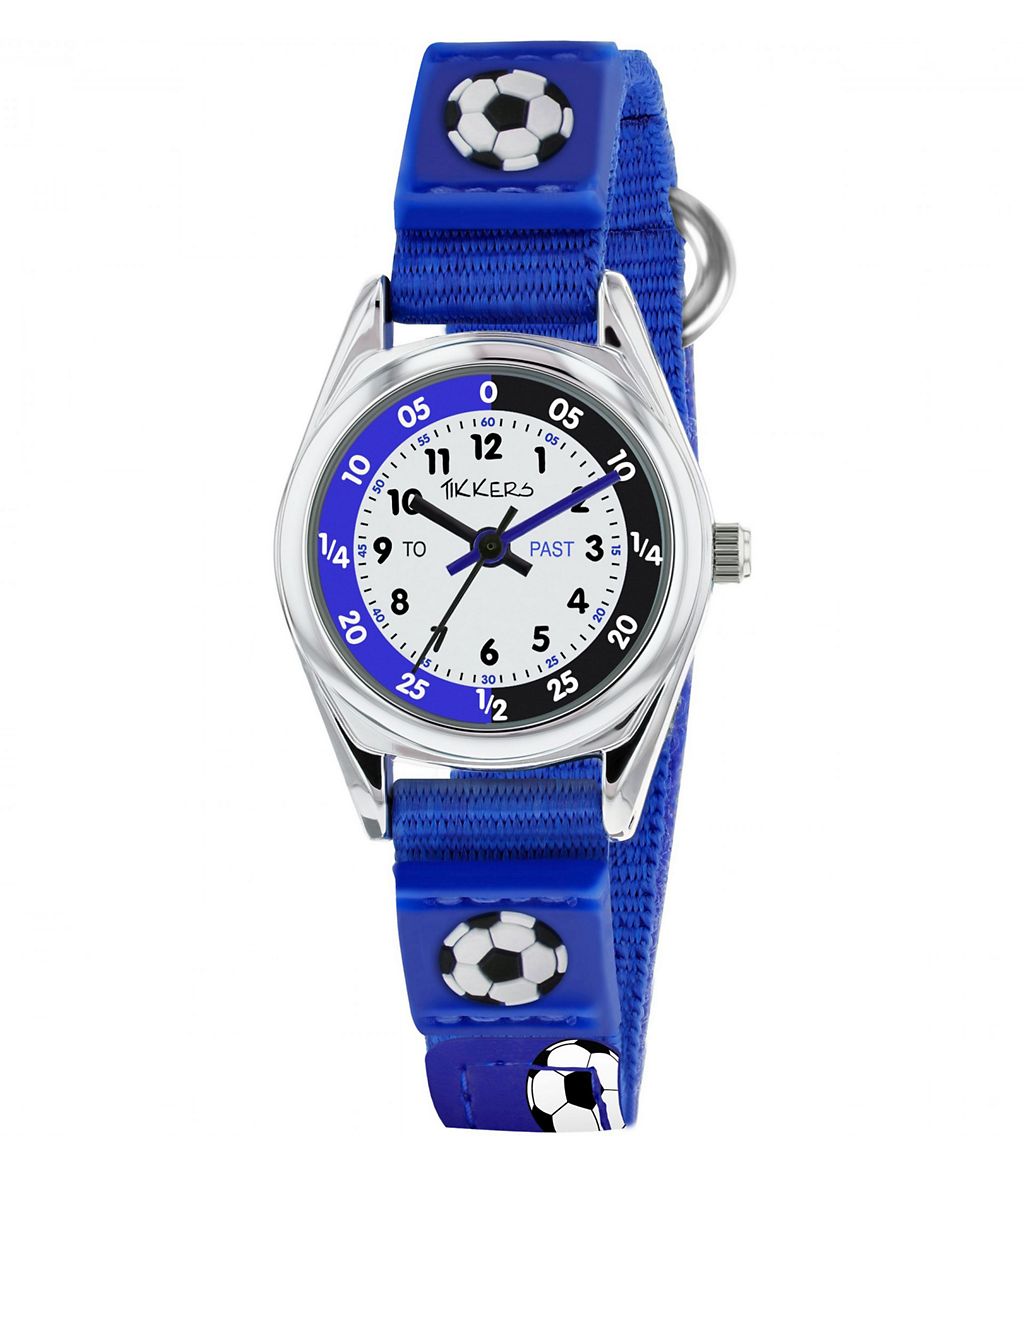 Tikkers Football Watch Gift Set 1 of 6